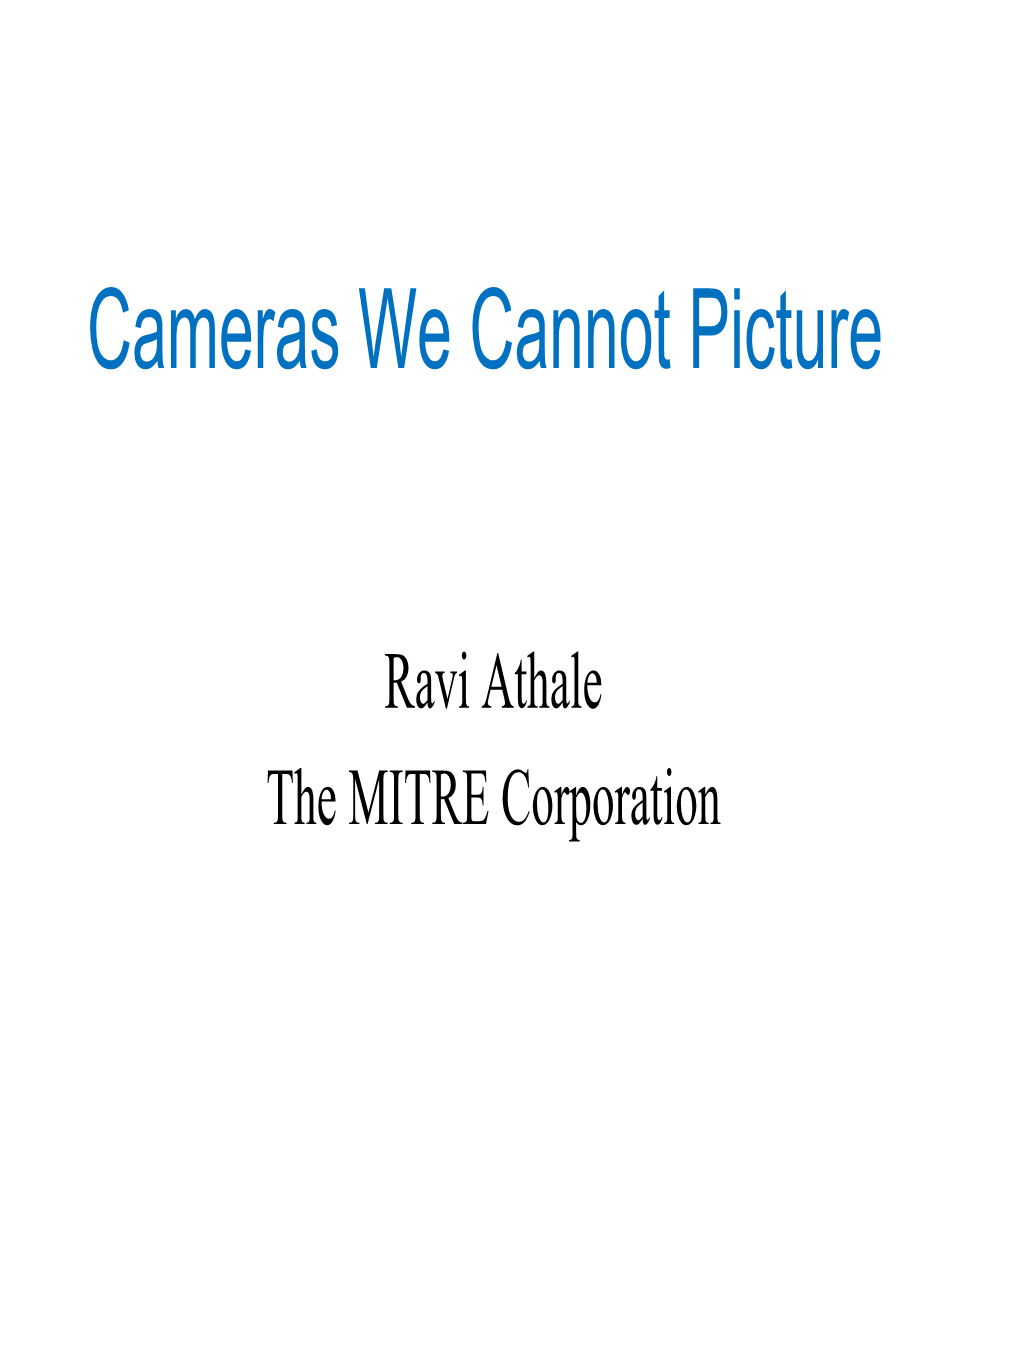 Lecture 9, Part 2A: Cameras We Cannot Picture